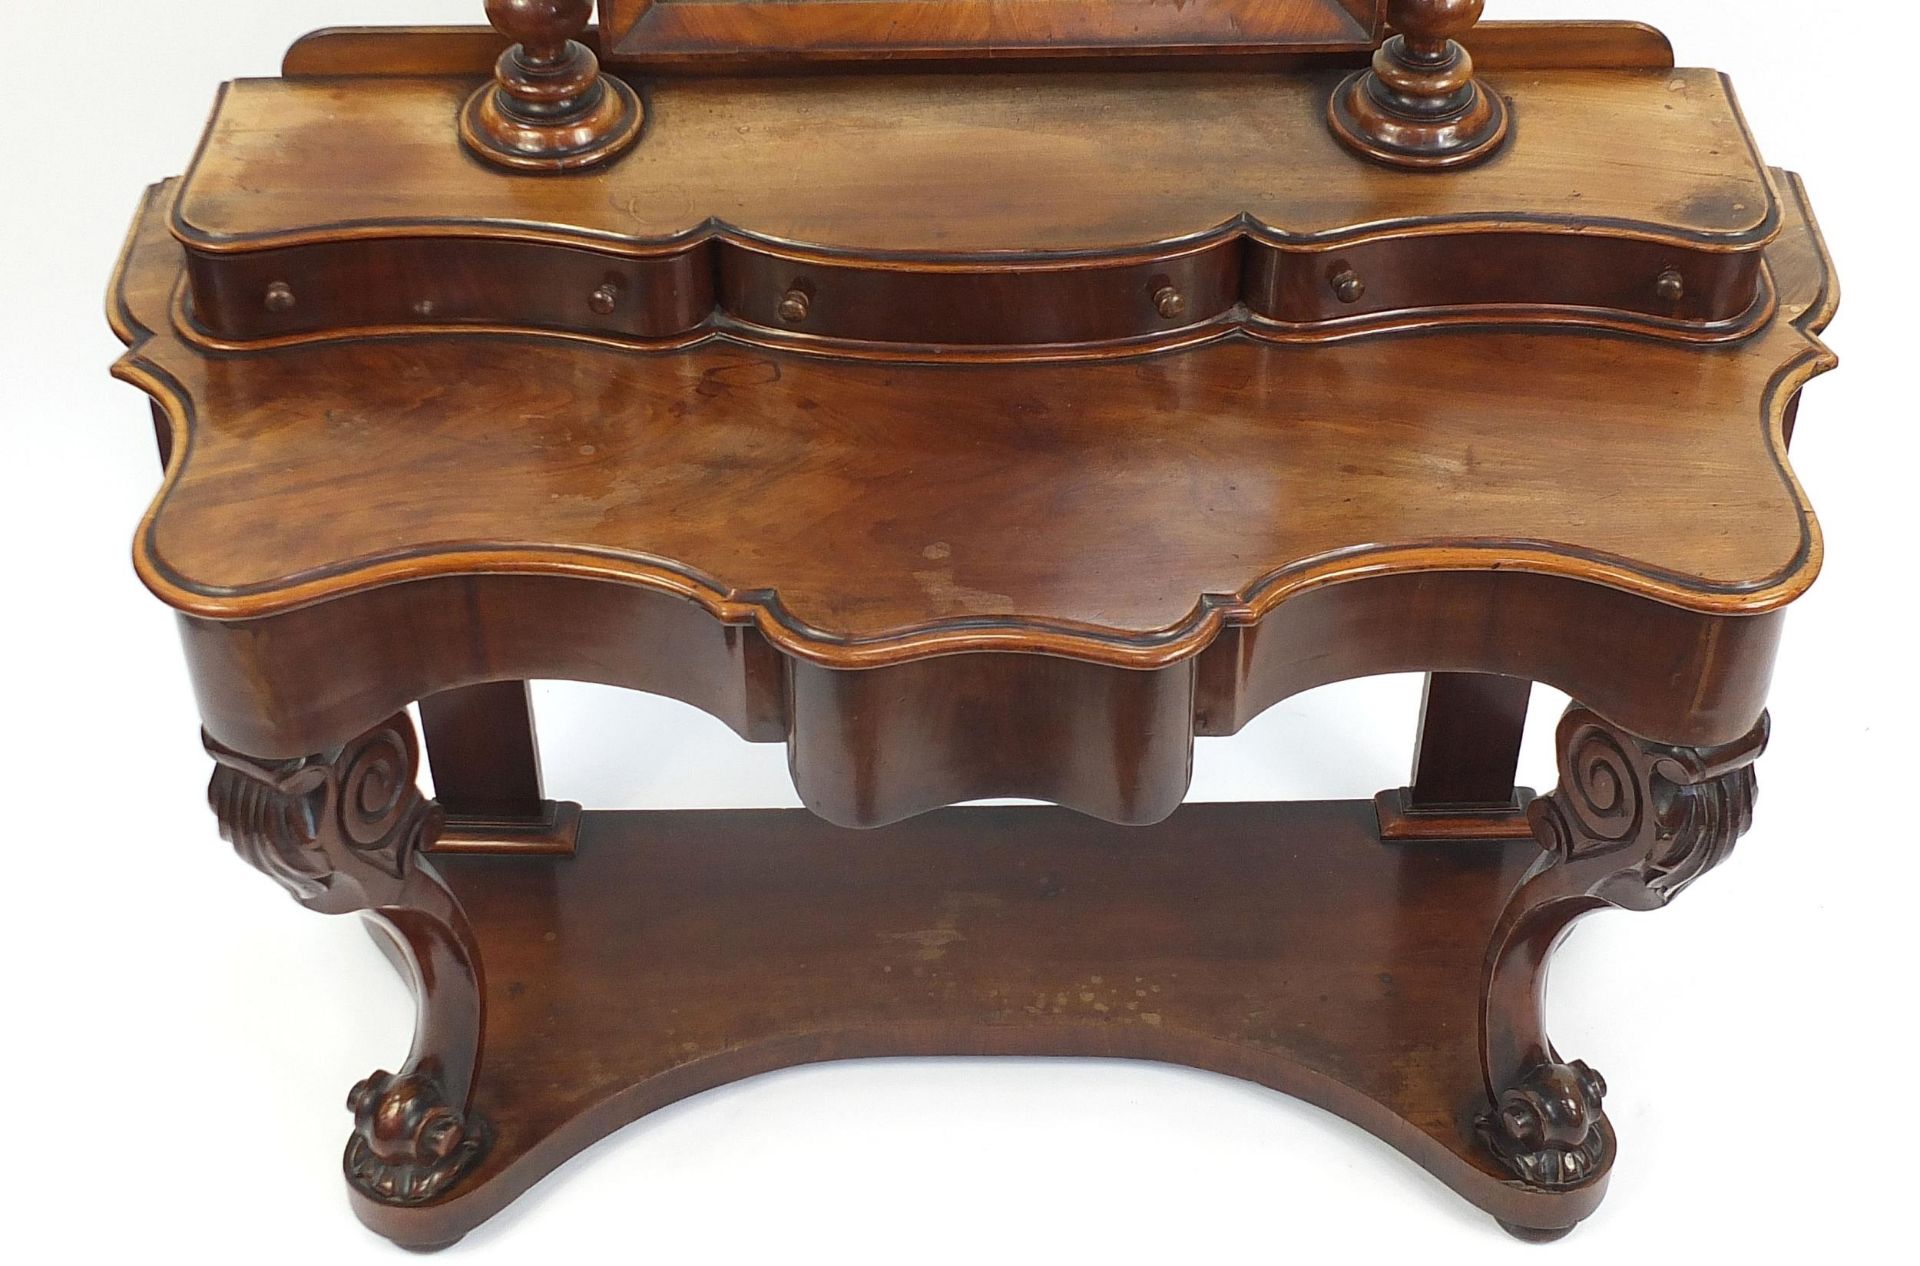 Victorian mahogany Duchess dressing table with swing mirror, 155cm H x 120cm W x 53cm D - Image 3 of 5